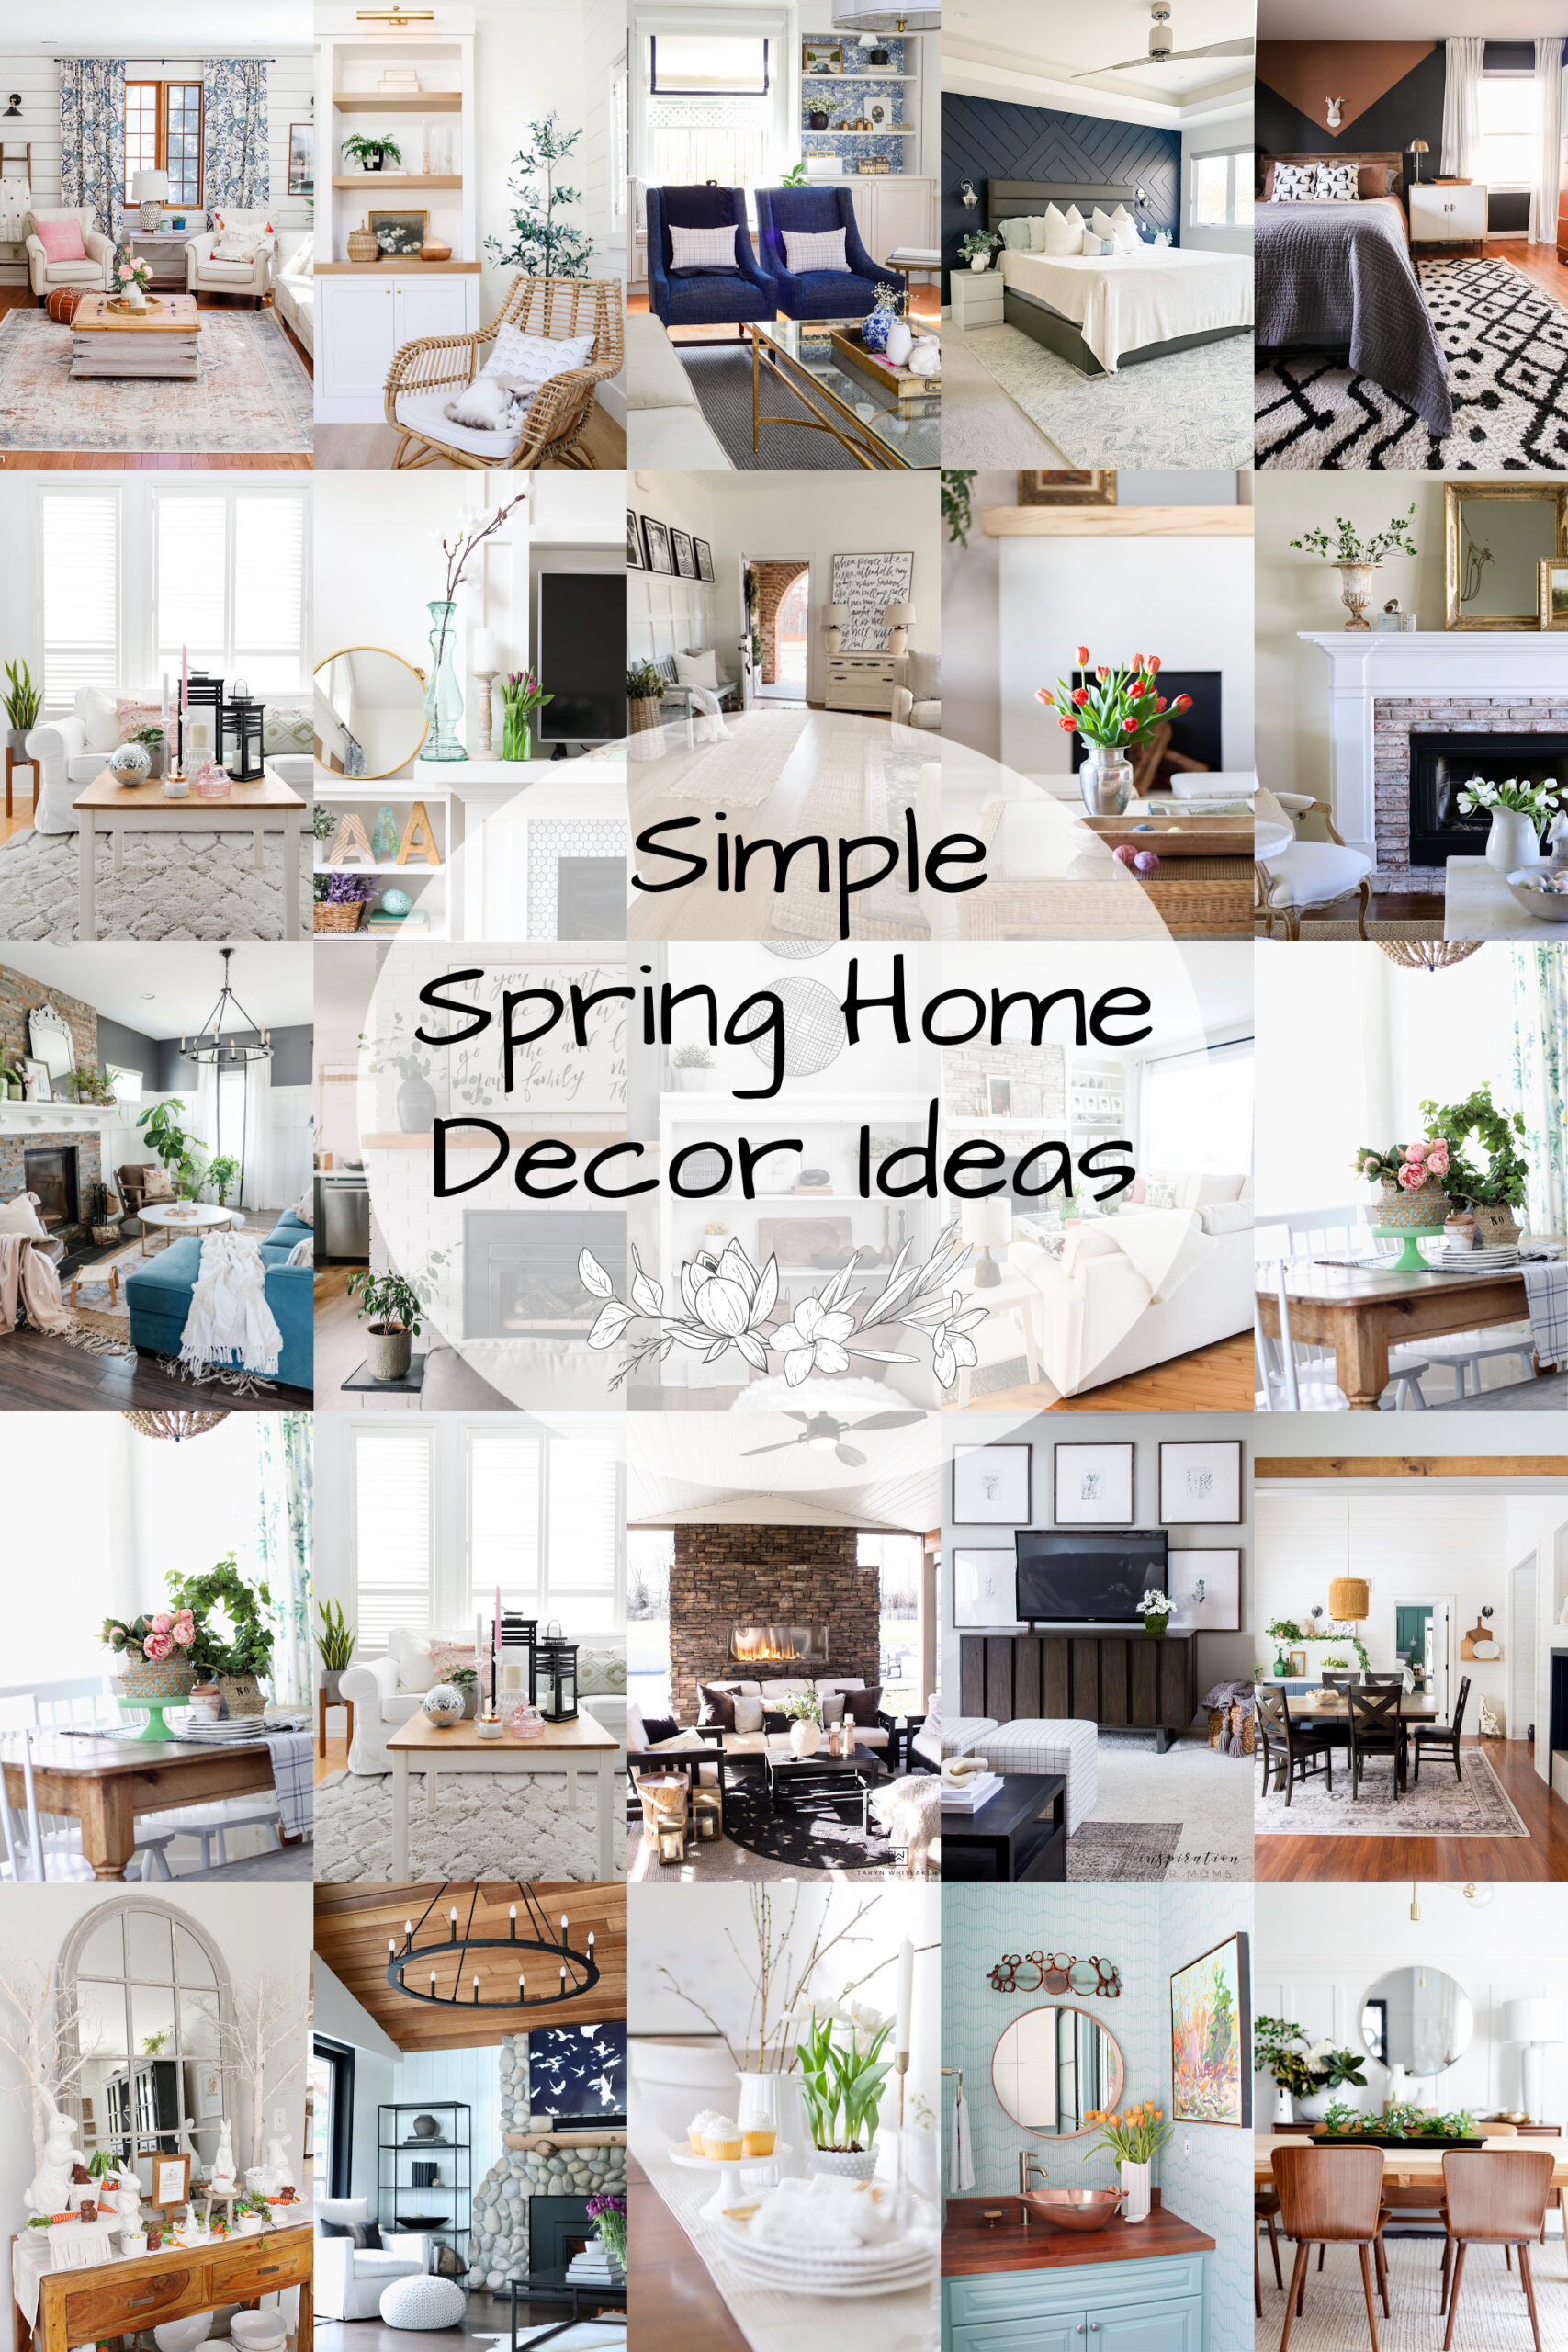 Spring Decorating Ideas on a Budget | The Happy Housie